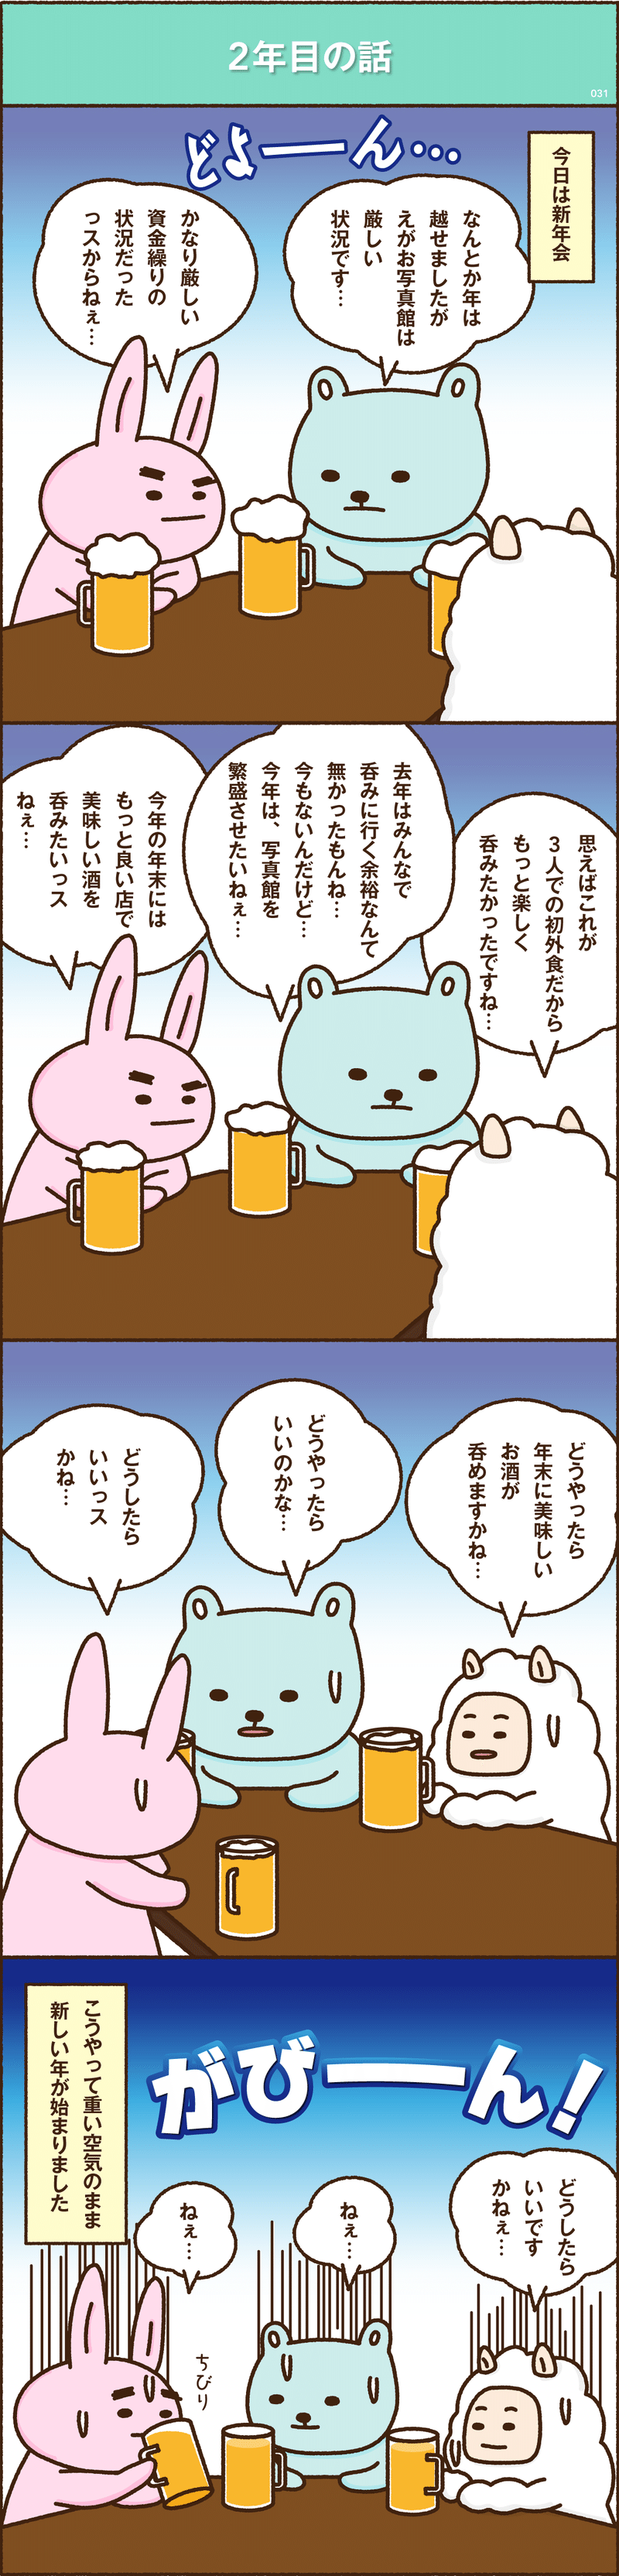 note漫画_2部_#031_2_アートボード 1